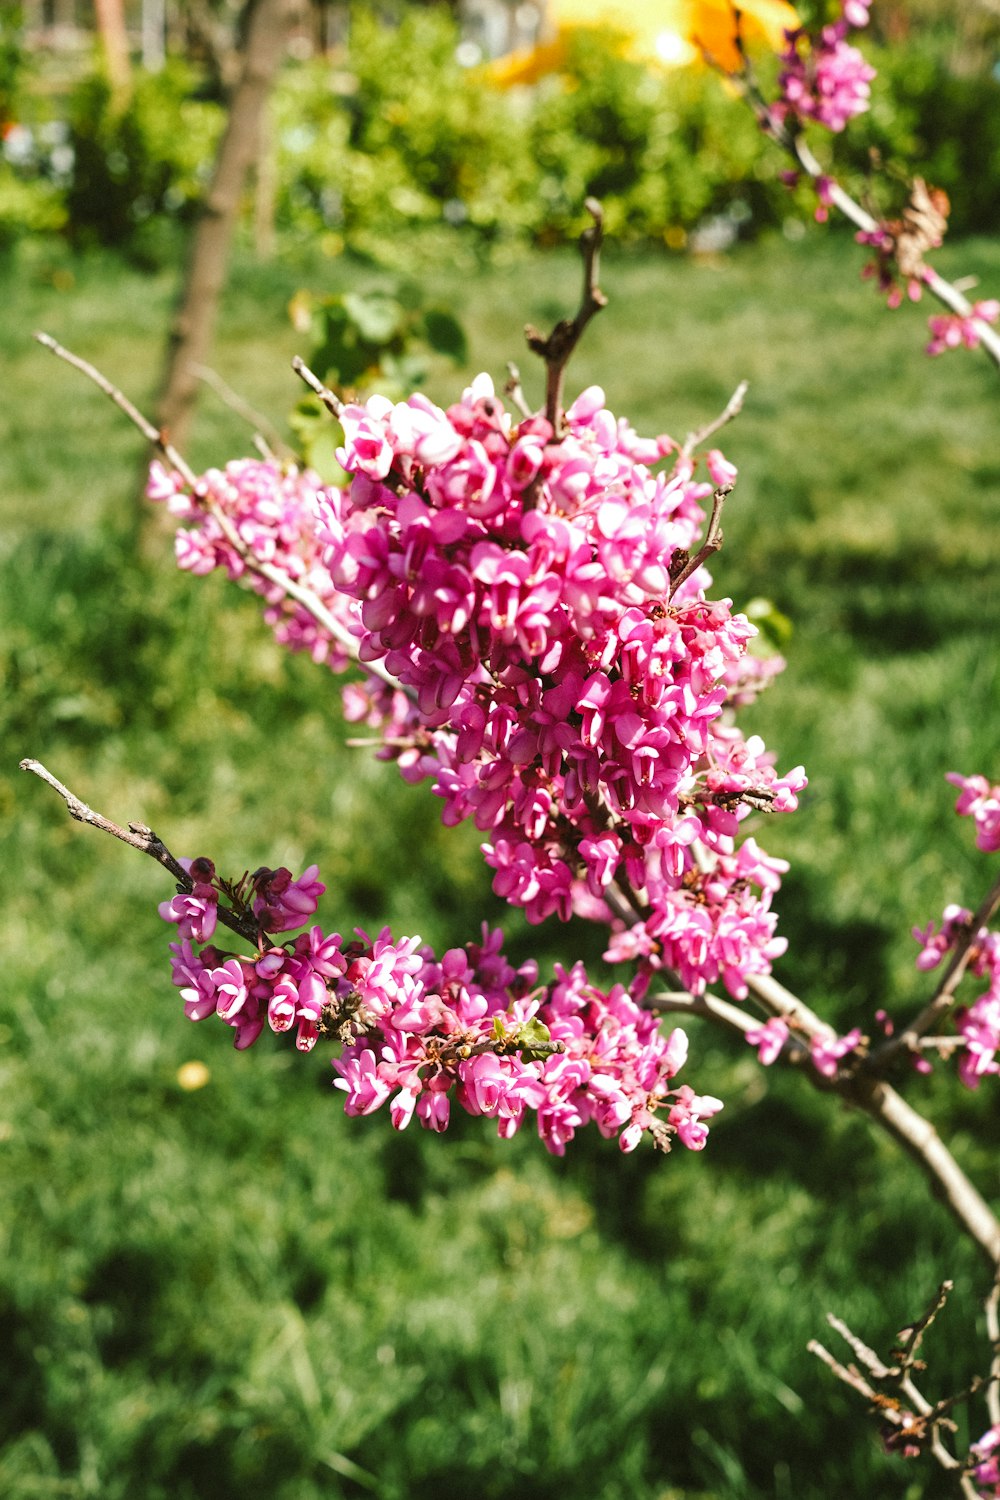 a bush with pink flowers in a grassy area